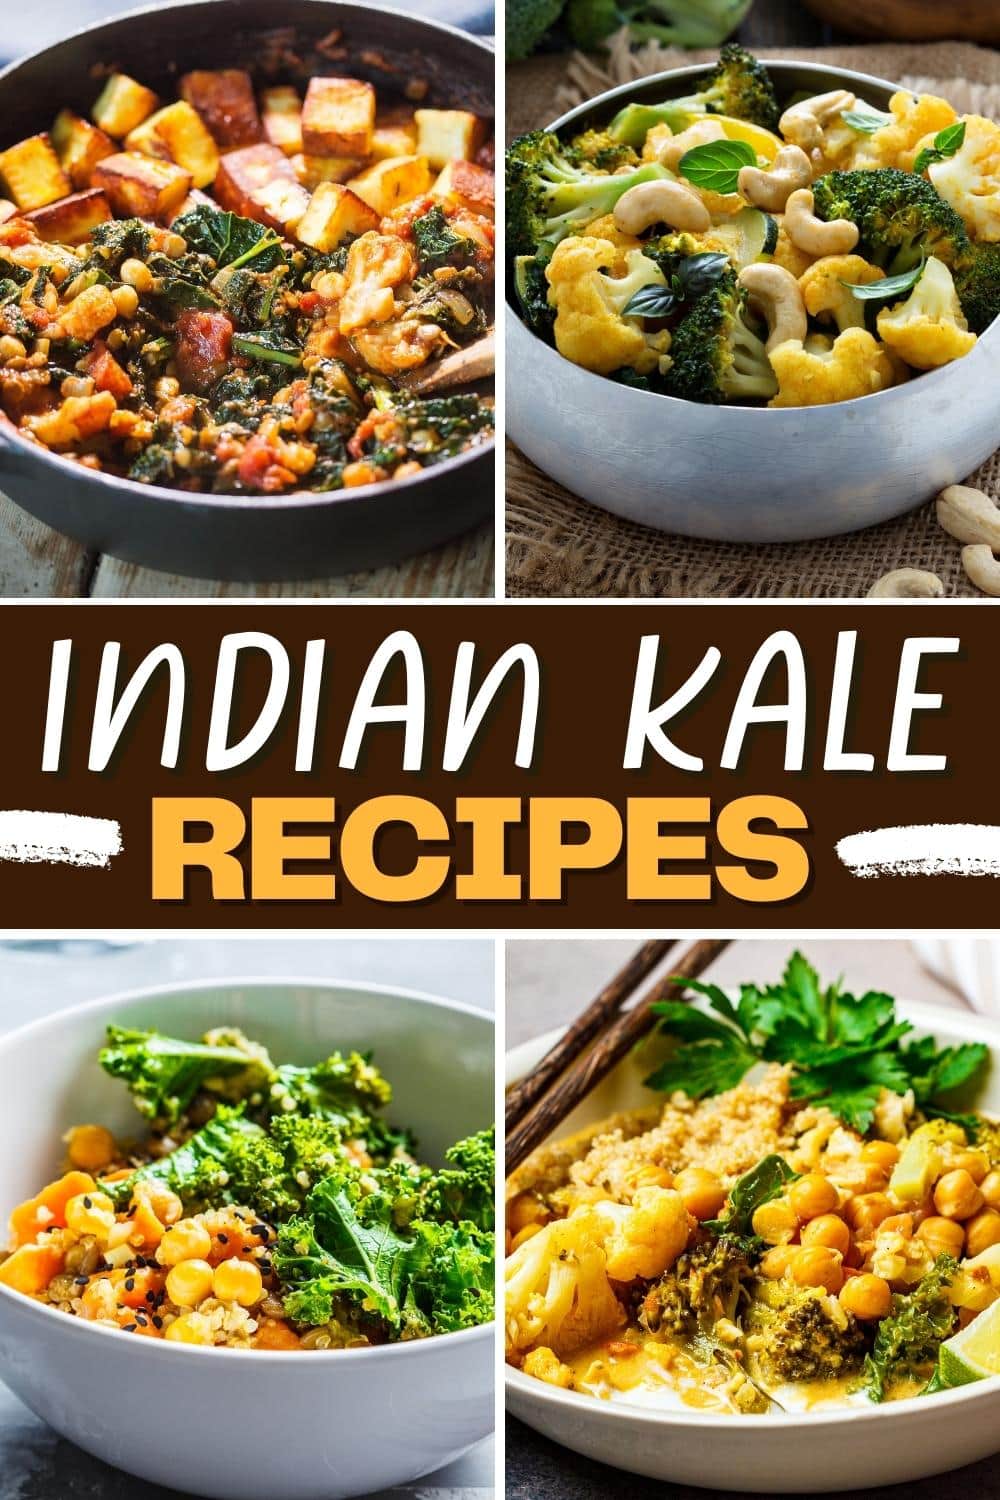 10 Indian Kale Recipes to Make at Home - Insanely Good